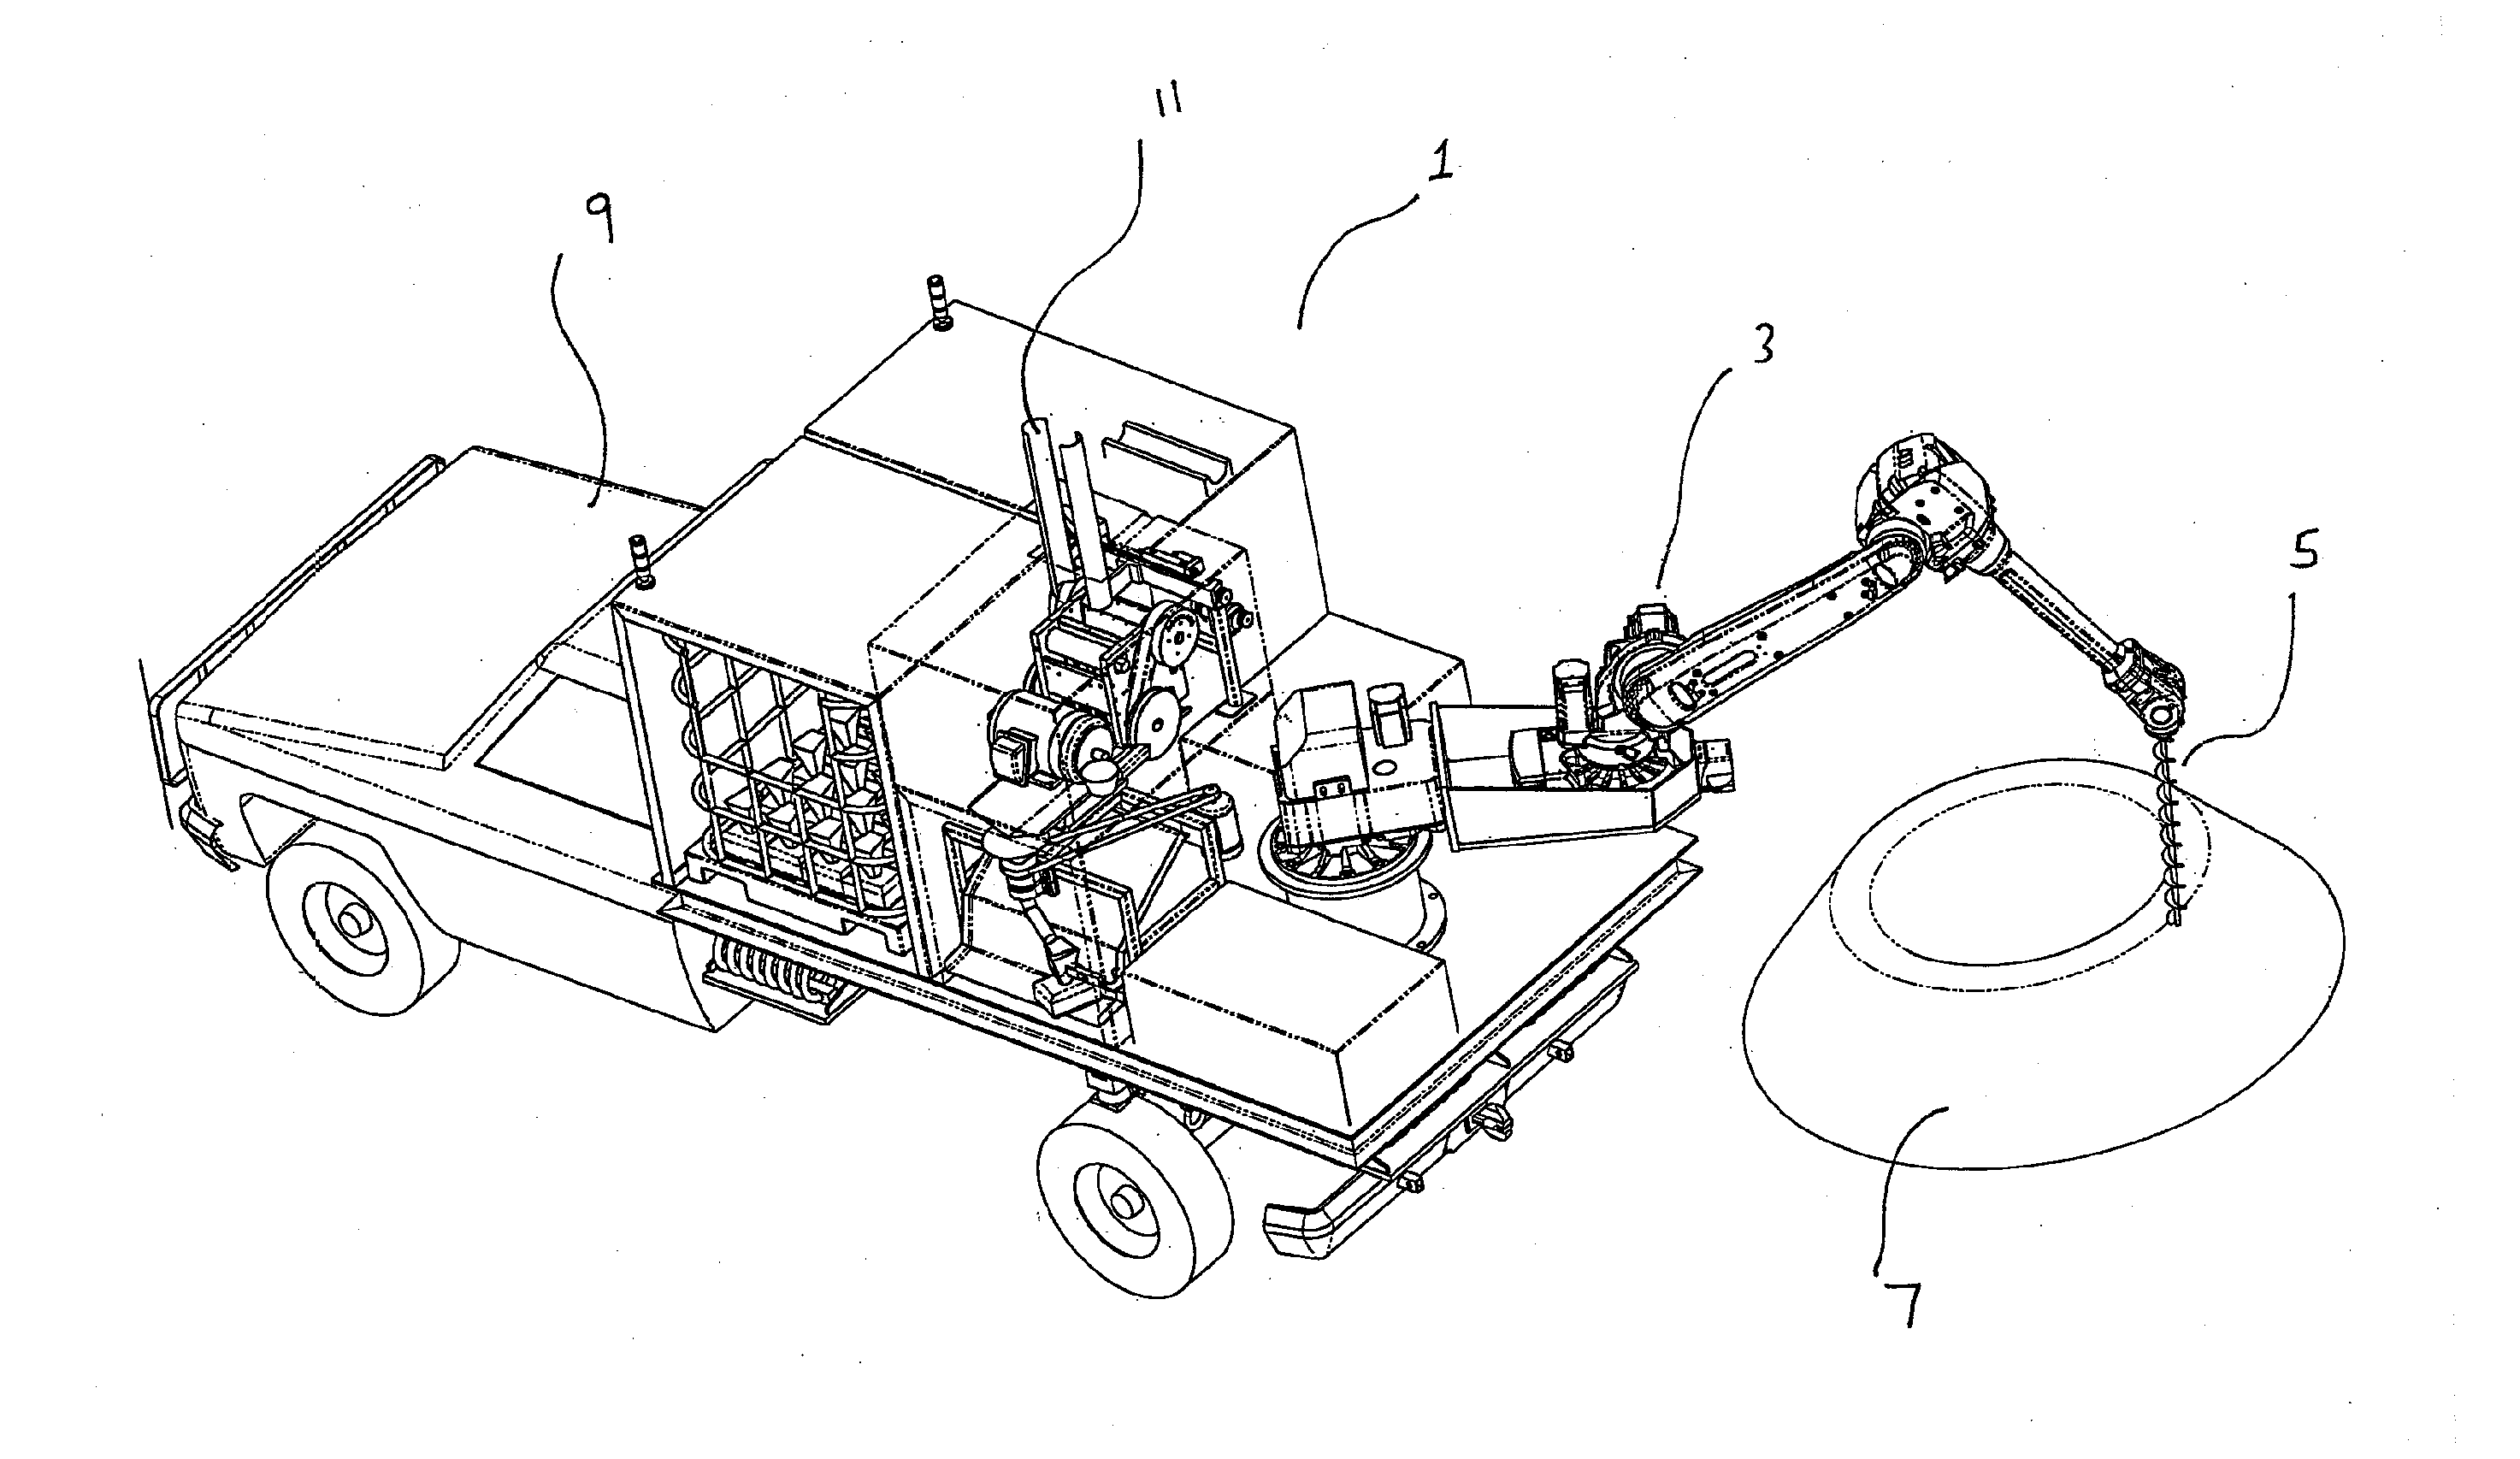 Self Contained Sampling and Processing Facility